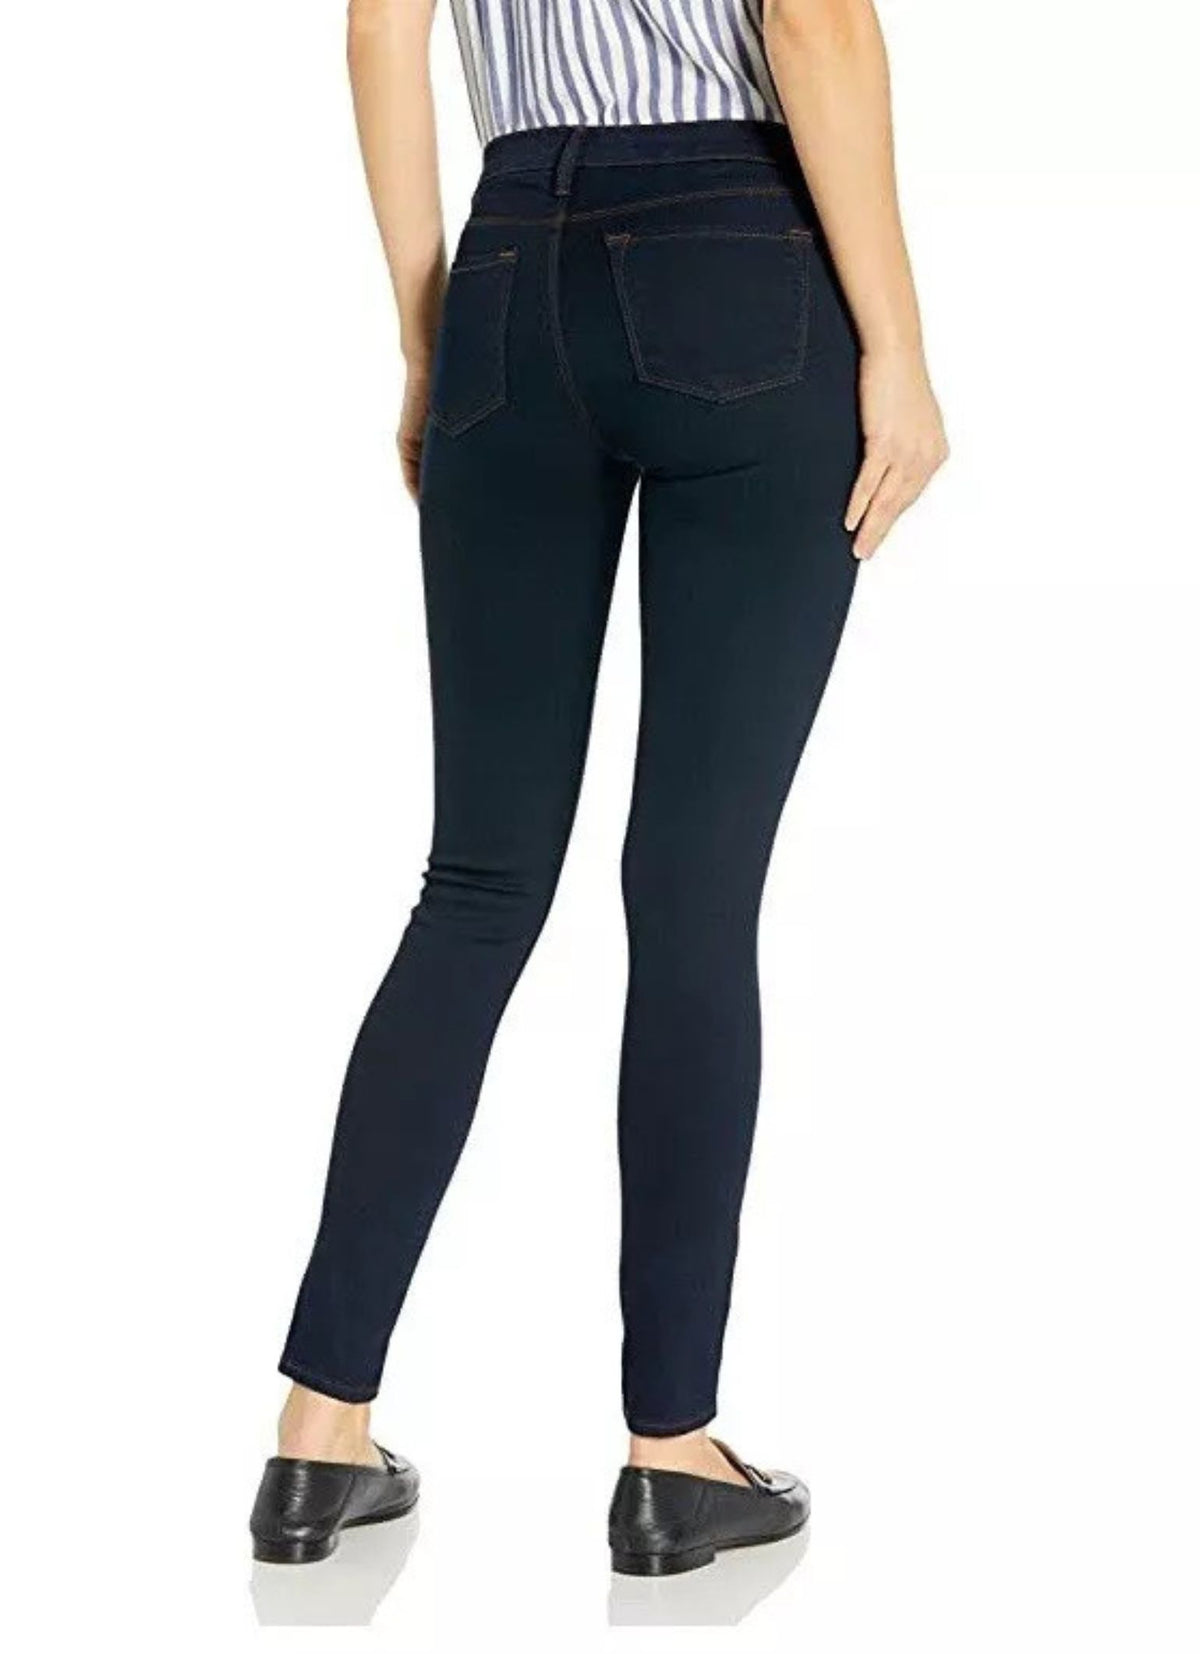 J Brand Clean Skinny Jeans - Second Chance